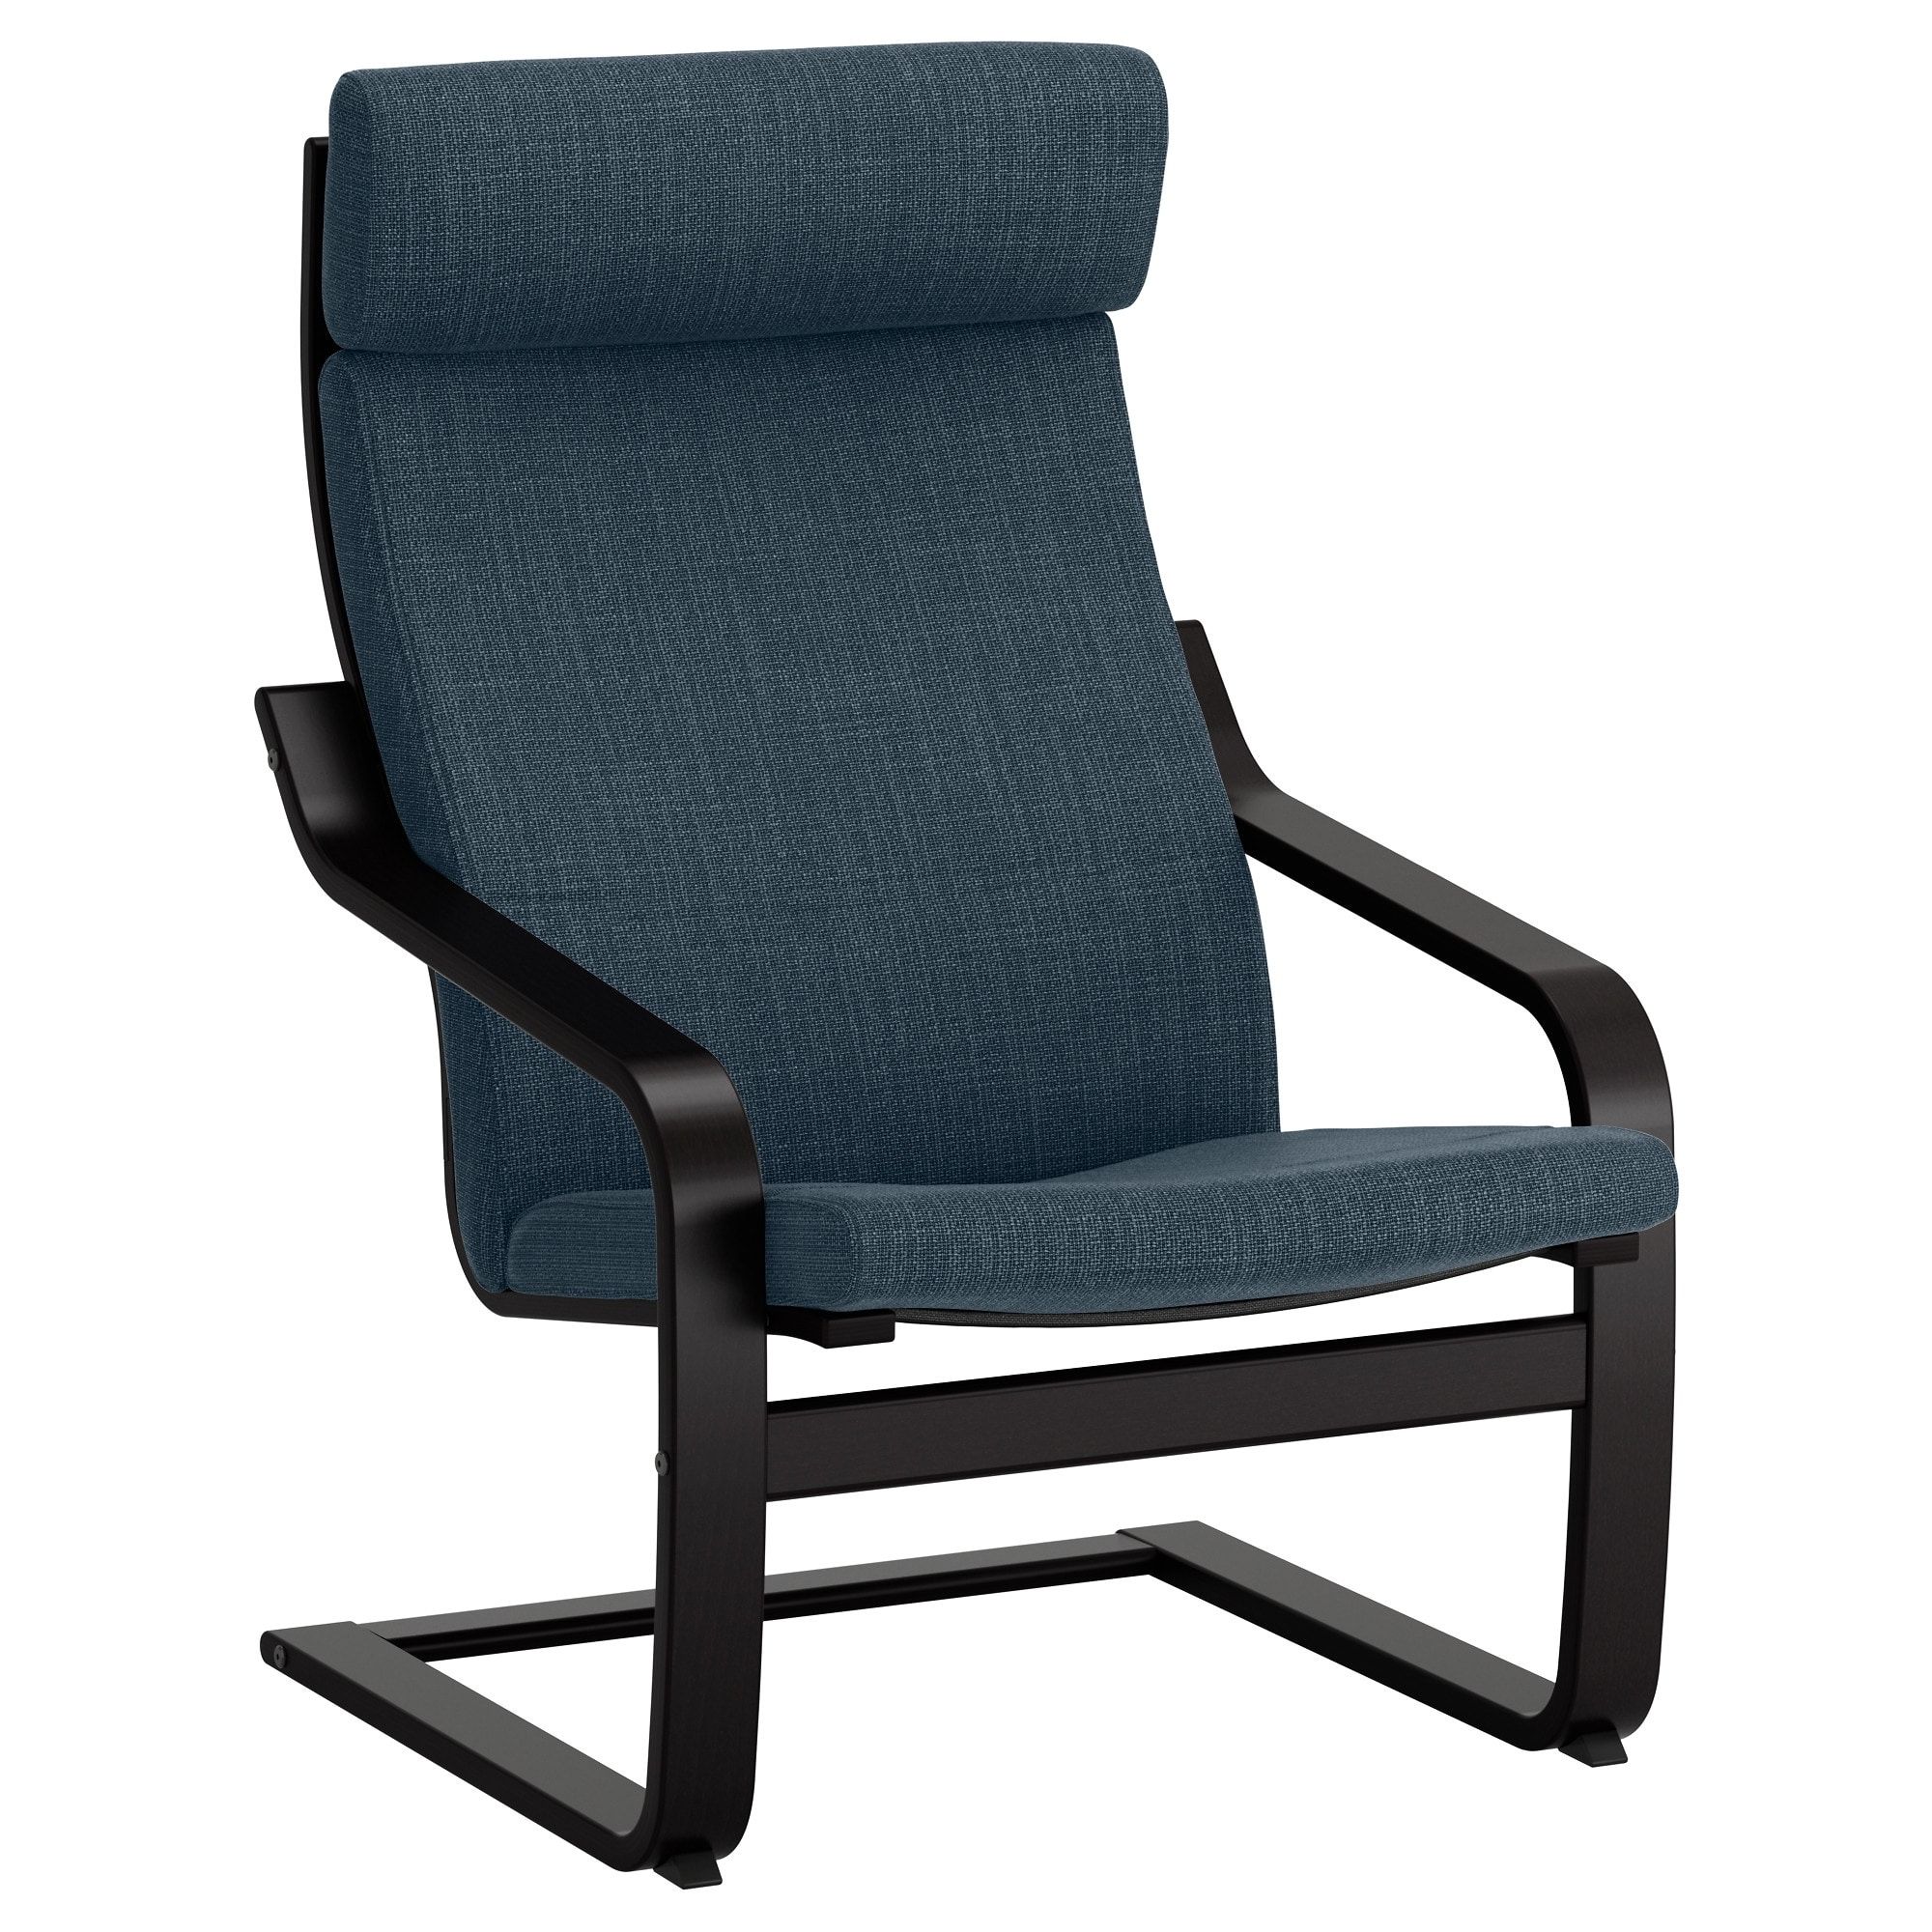 Rocking Chairs At Ikea For Well Liked Poäng Armchair – Hillared Anthracite – Ikea (View 4 of 20)